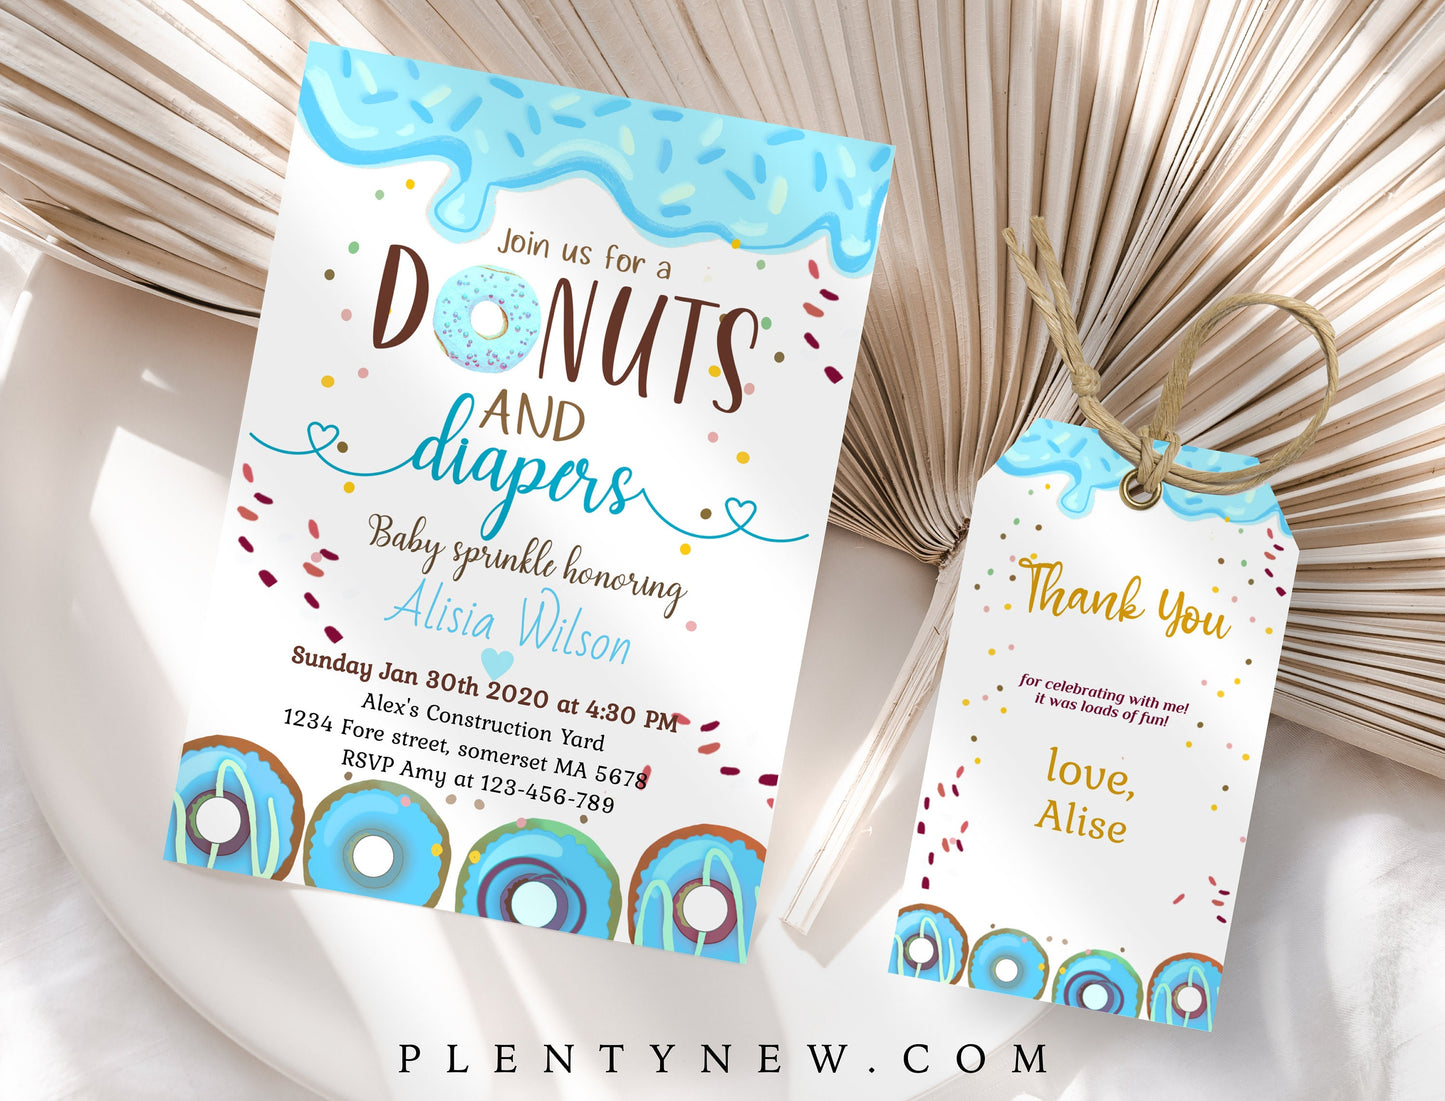 Editable Donuts And Diapers Baby Sprinkle Donut Baby Sprinkle Donut Baby Shower Editable Donut Sprinkle Instant Download File Corjl, PFA